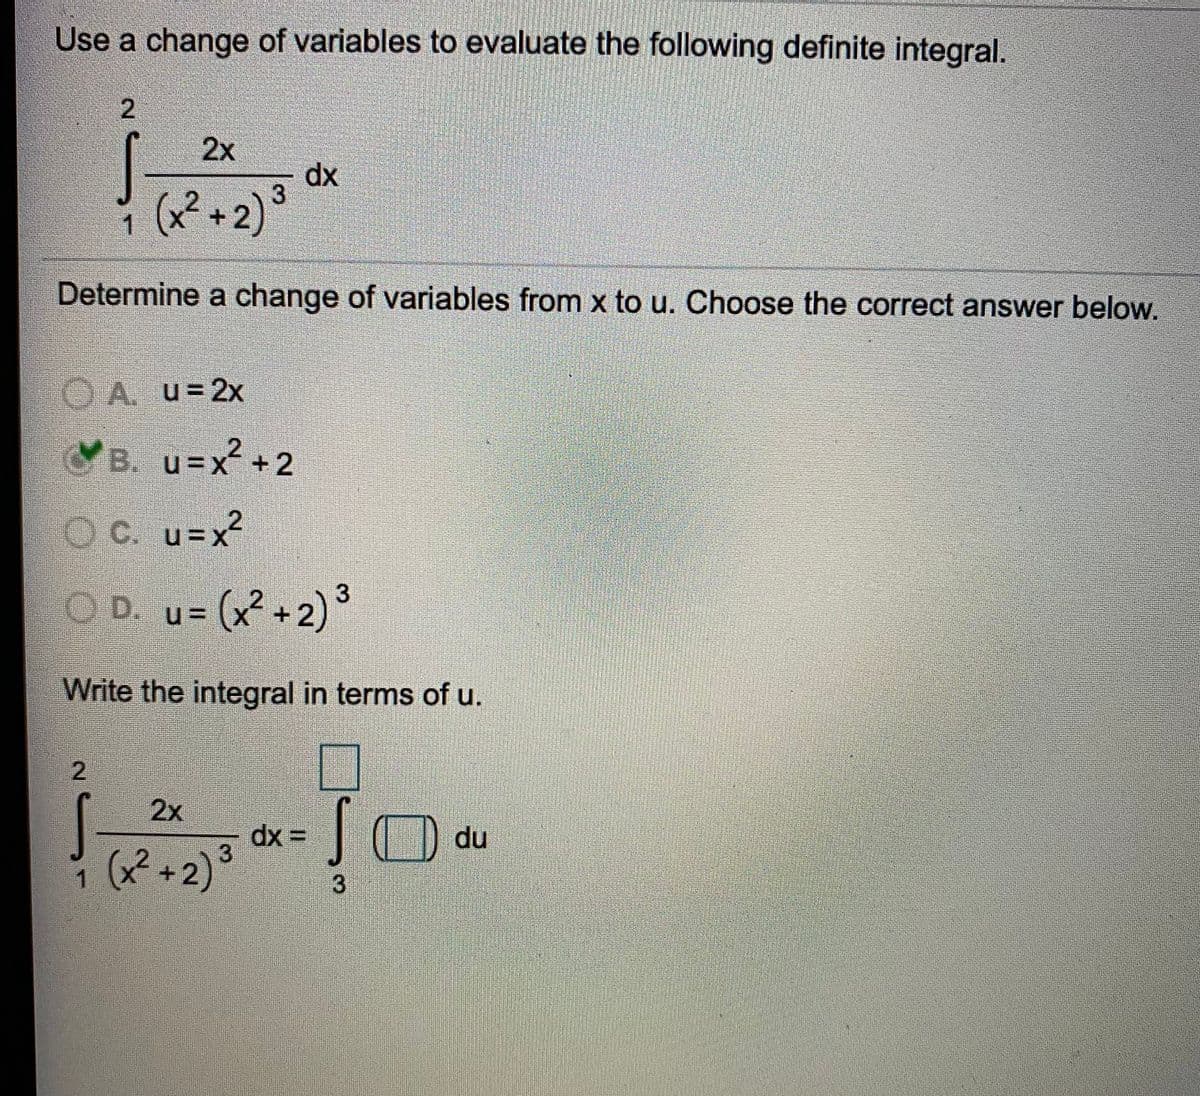 Use a change of variables to evaluate the following definite integral.
2.
2x
dx
3
1 (x² +2) °
Determine a change of variables from x to u. Choose the correct answer below.
O A. u=2x
CB. u=x+2
OC. u=x²
OD. u= (x+2)°
(x² +2)°
Write the integral in terms of u.
2
2x
dx =
3.
du
i (x² +2)³
1
3
